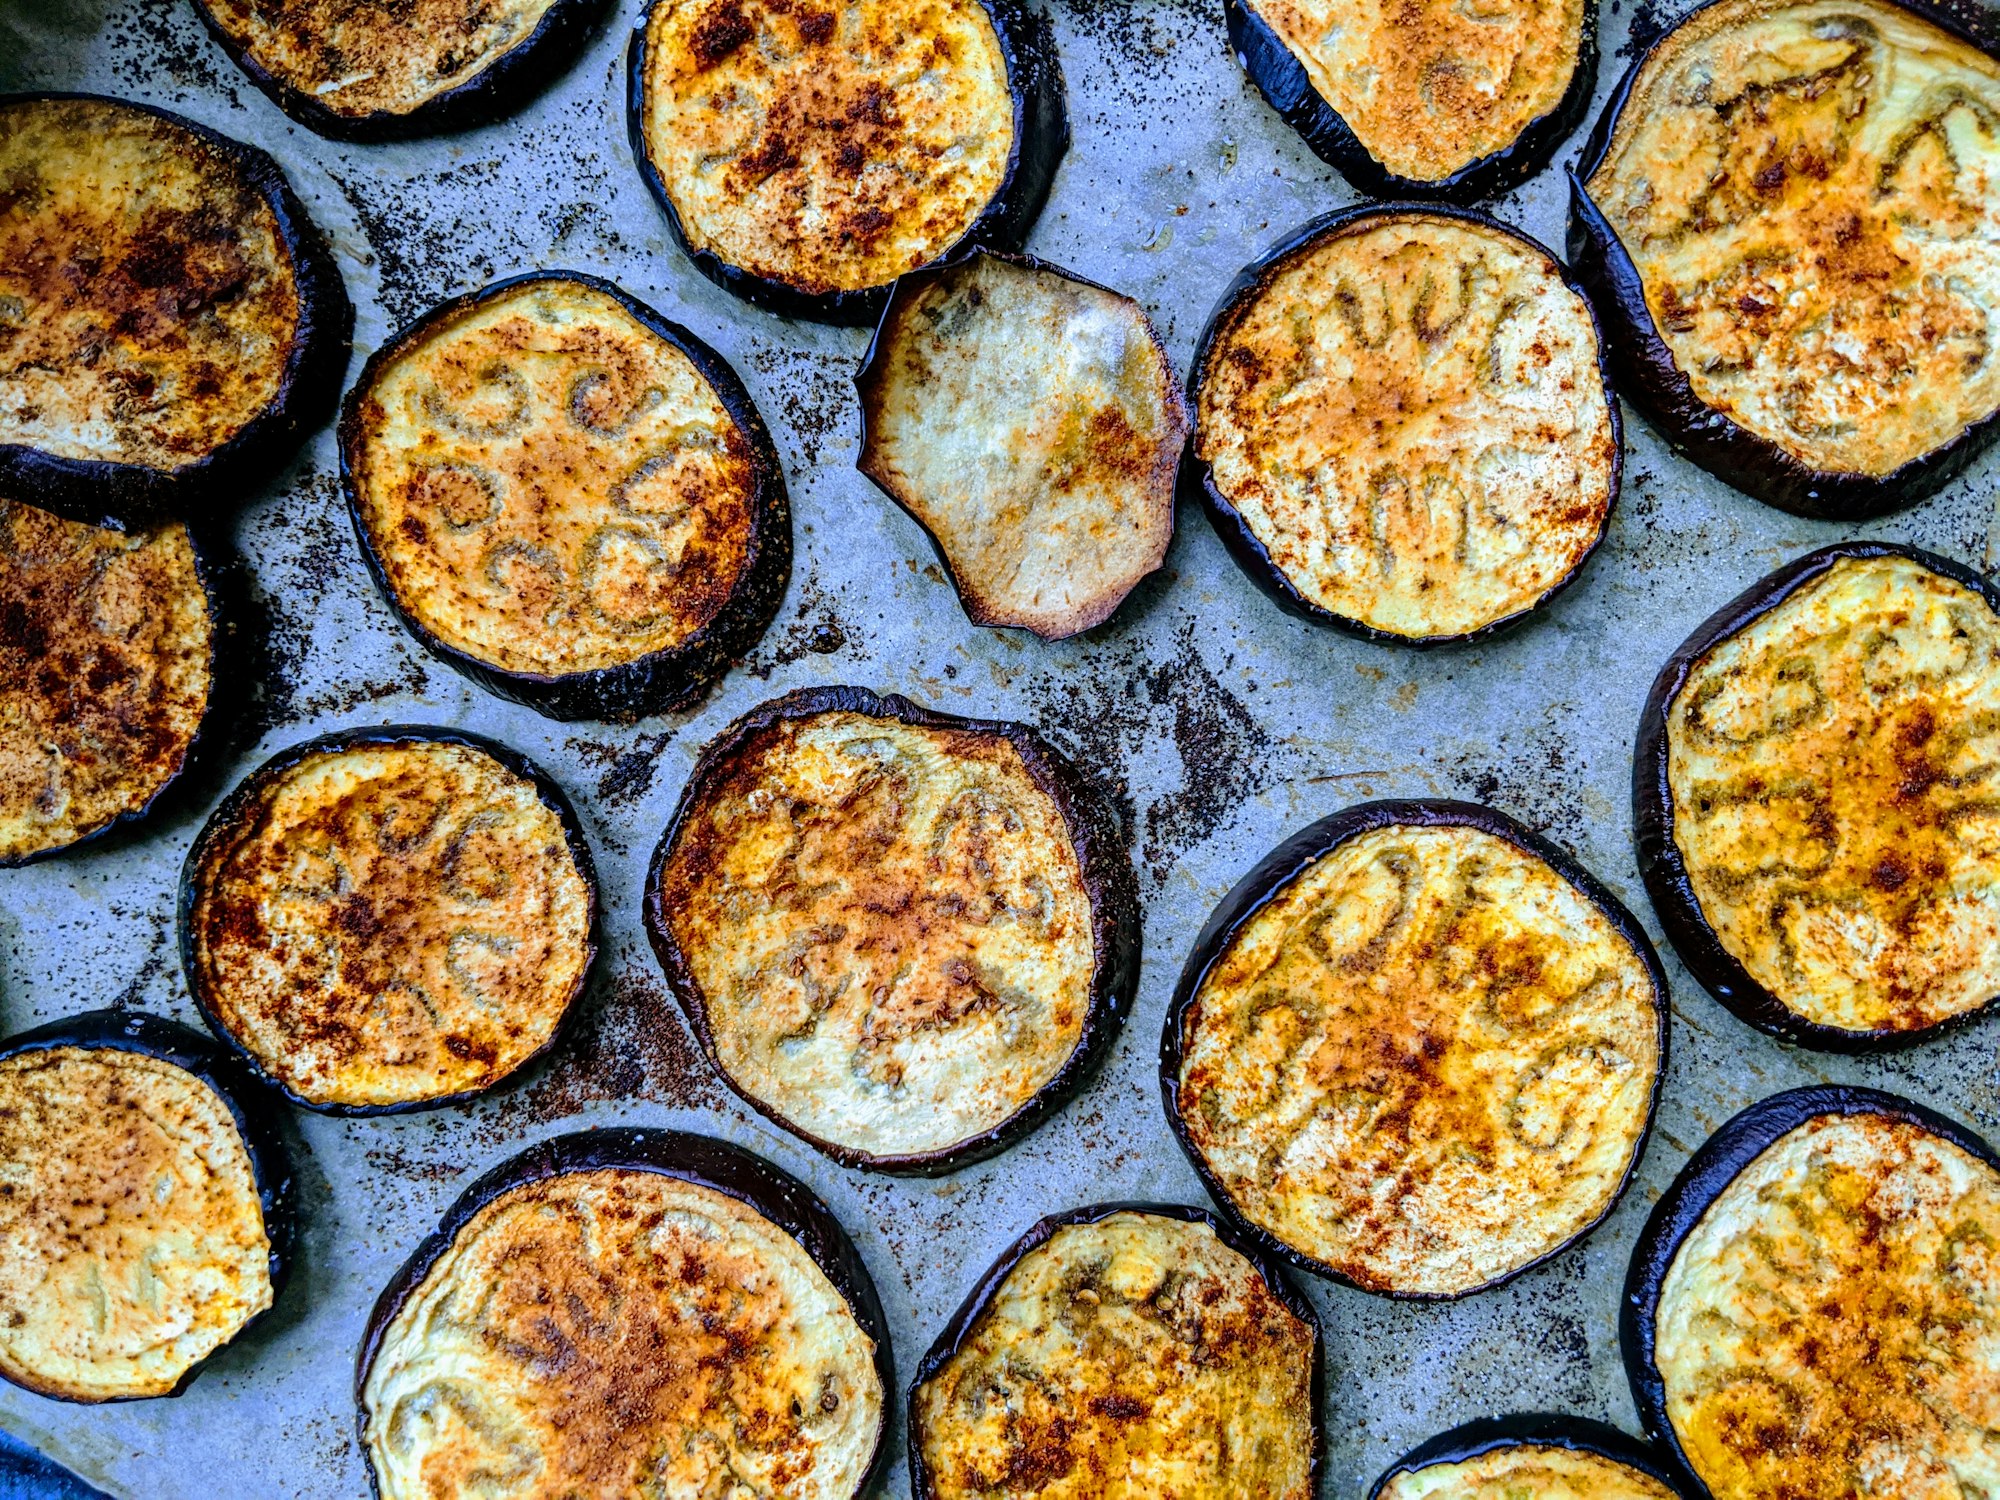 Aubergine slices are a great low carb pasta alternative for lasagna by Lucian Alexe for Unsplash.